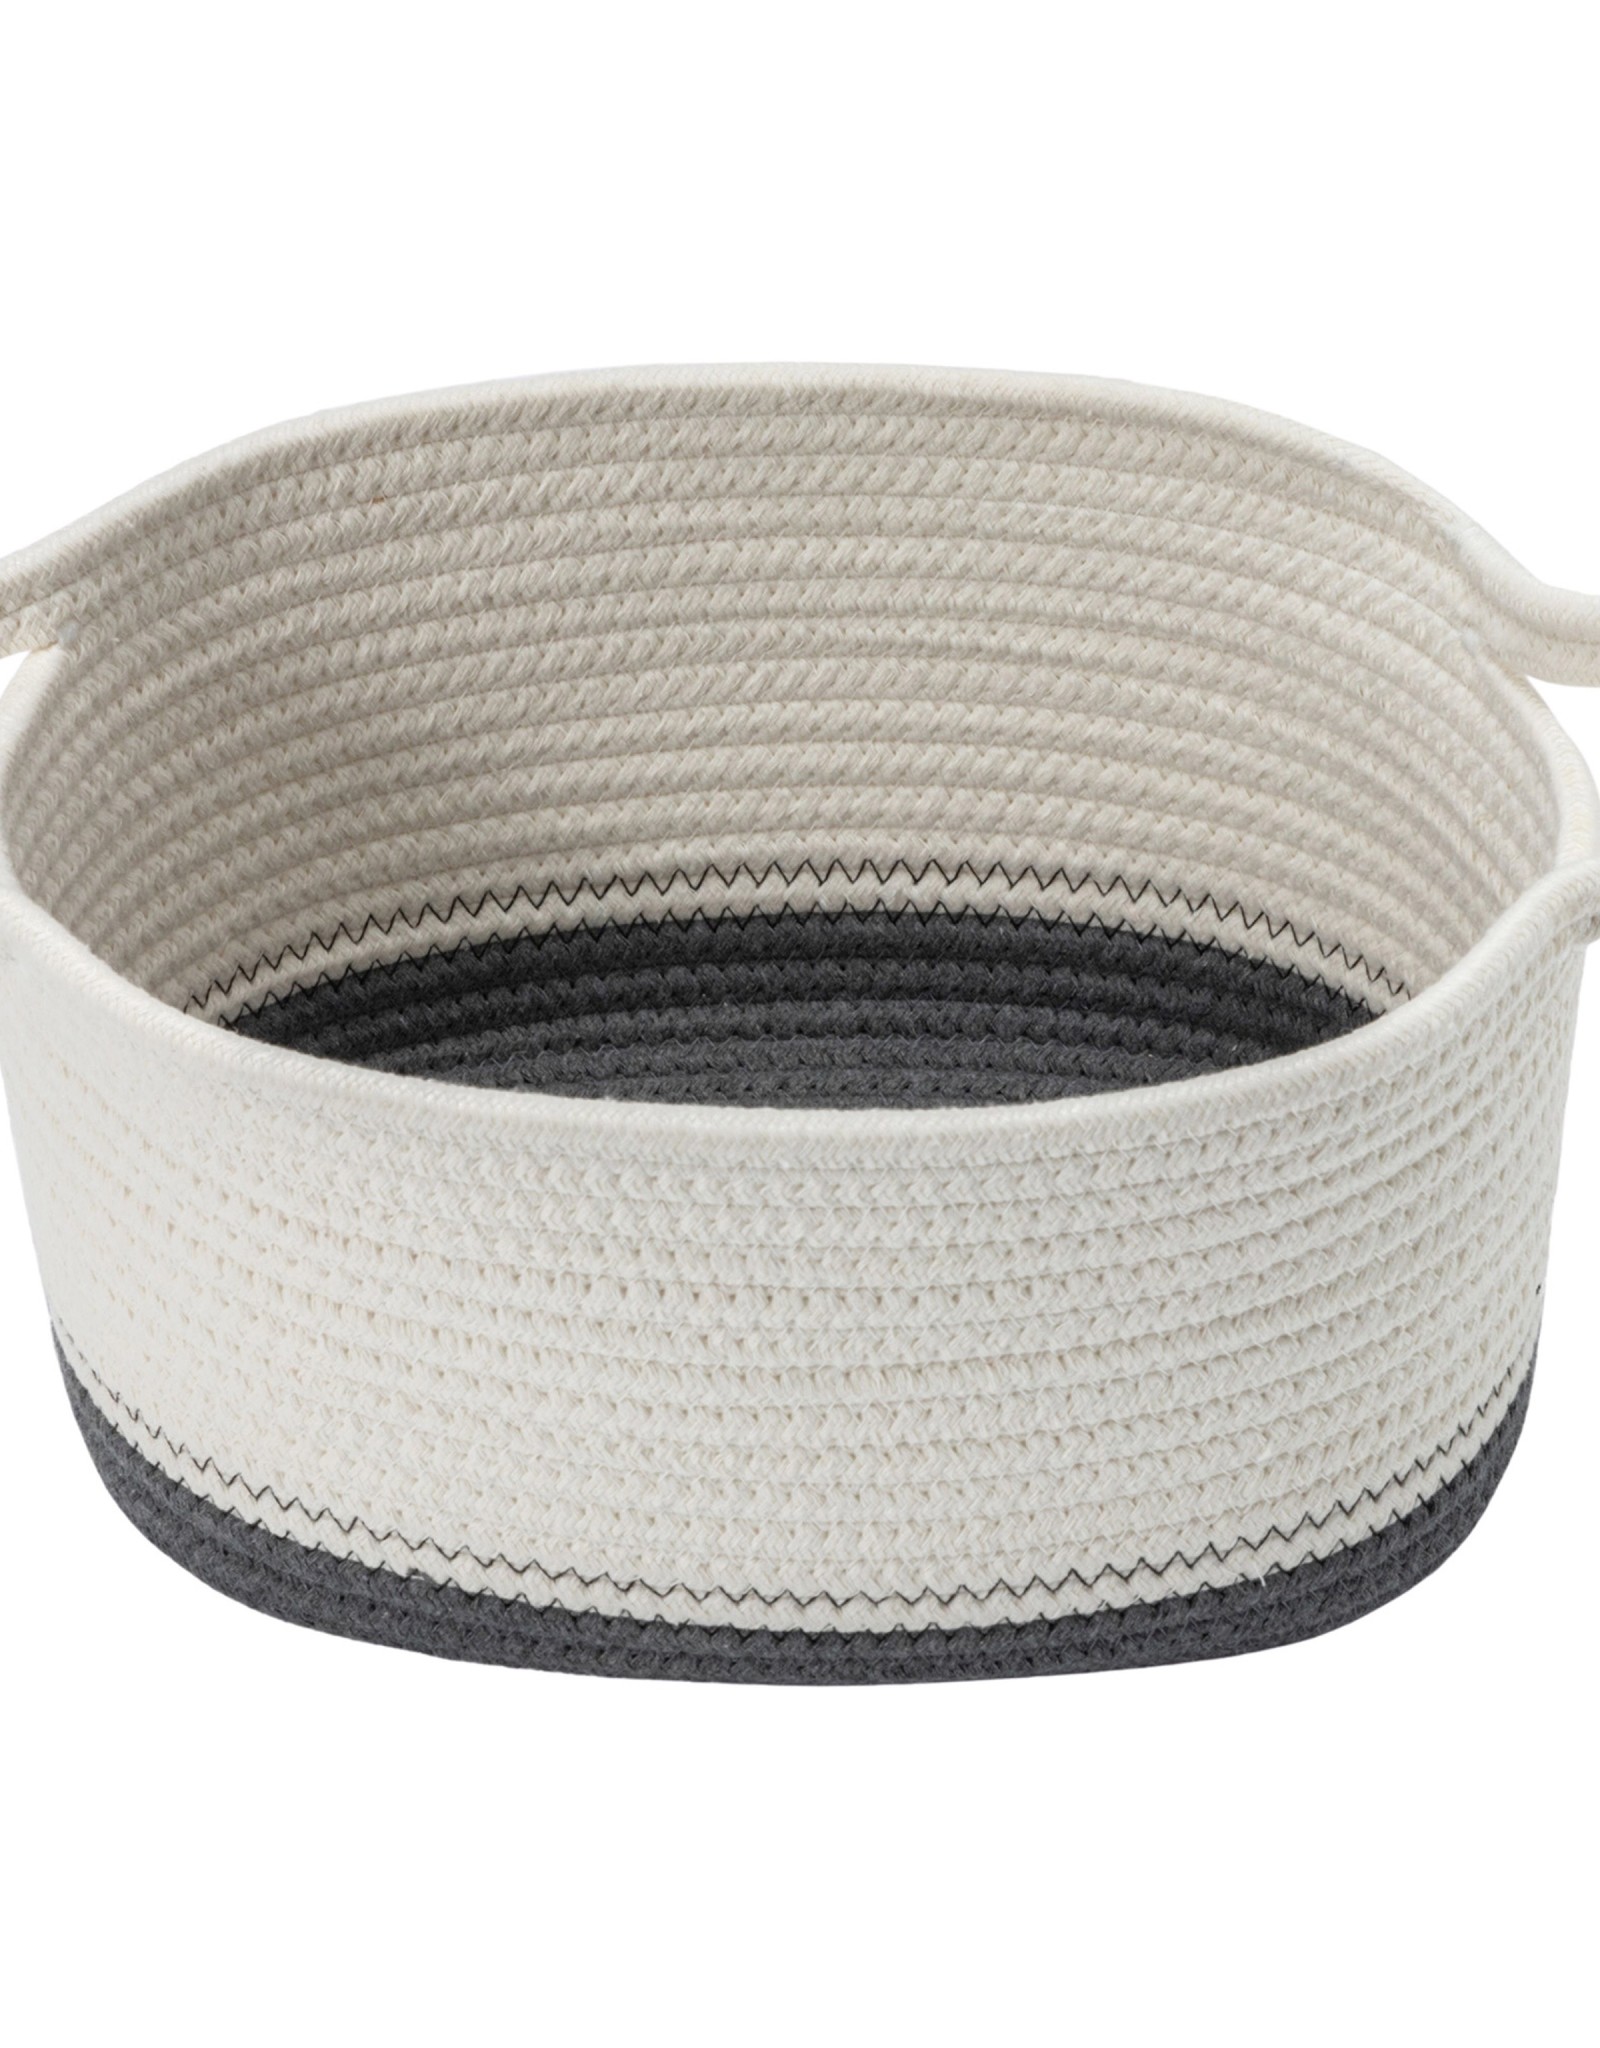 Cathay Basket Cathay Grey Cotton Rope Oval 12” L 10-2544